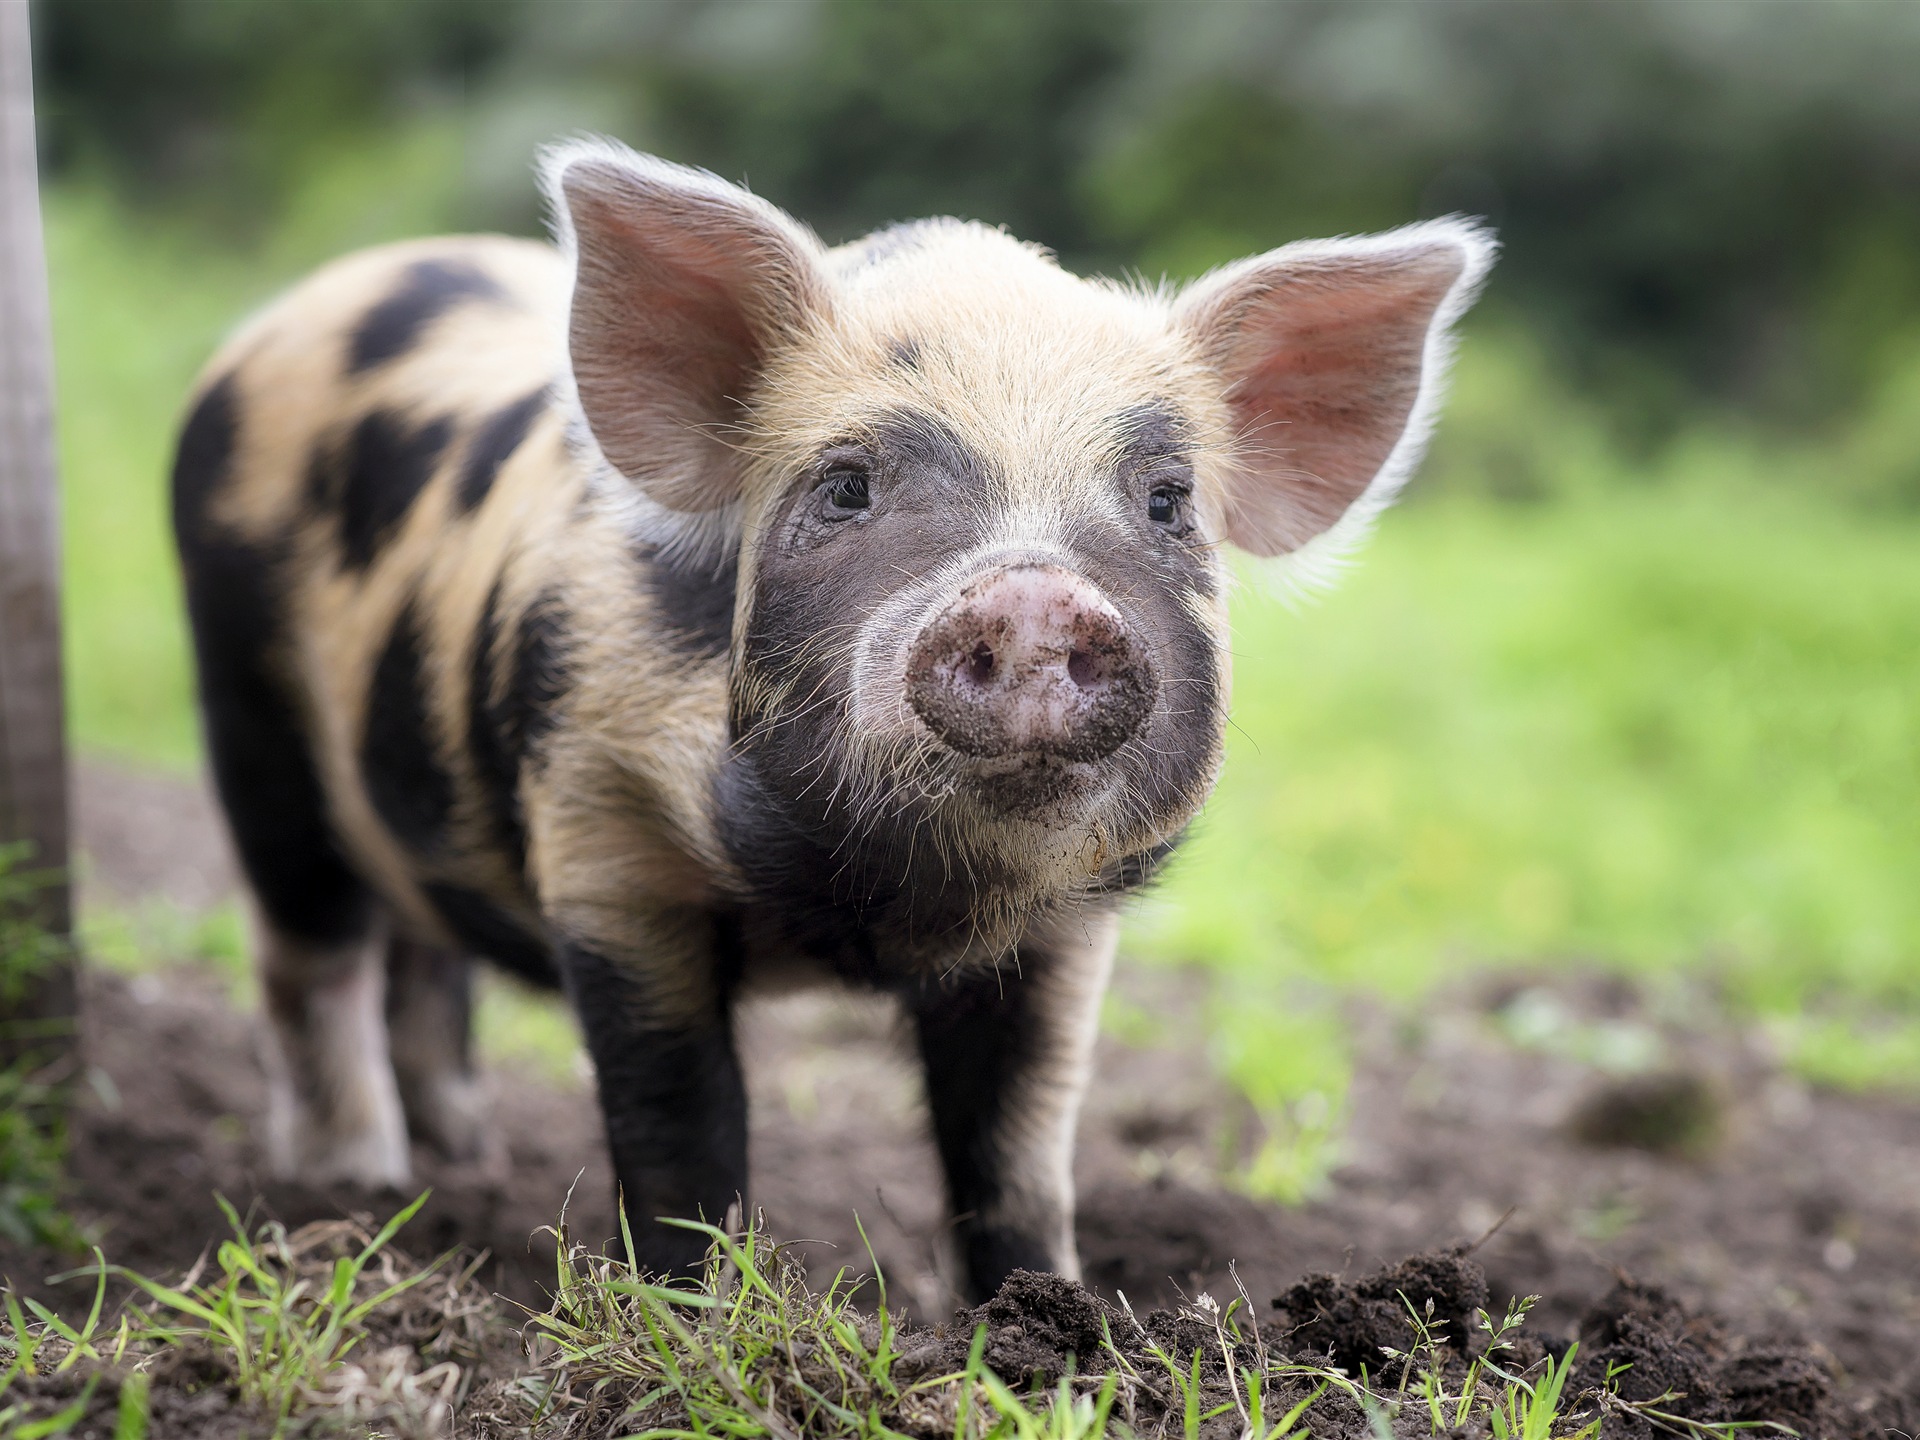 Pig Year about pigs HD wallpapers #8 - 1920x1440